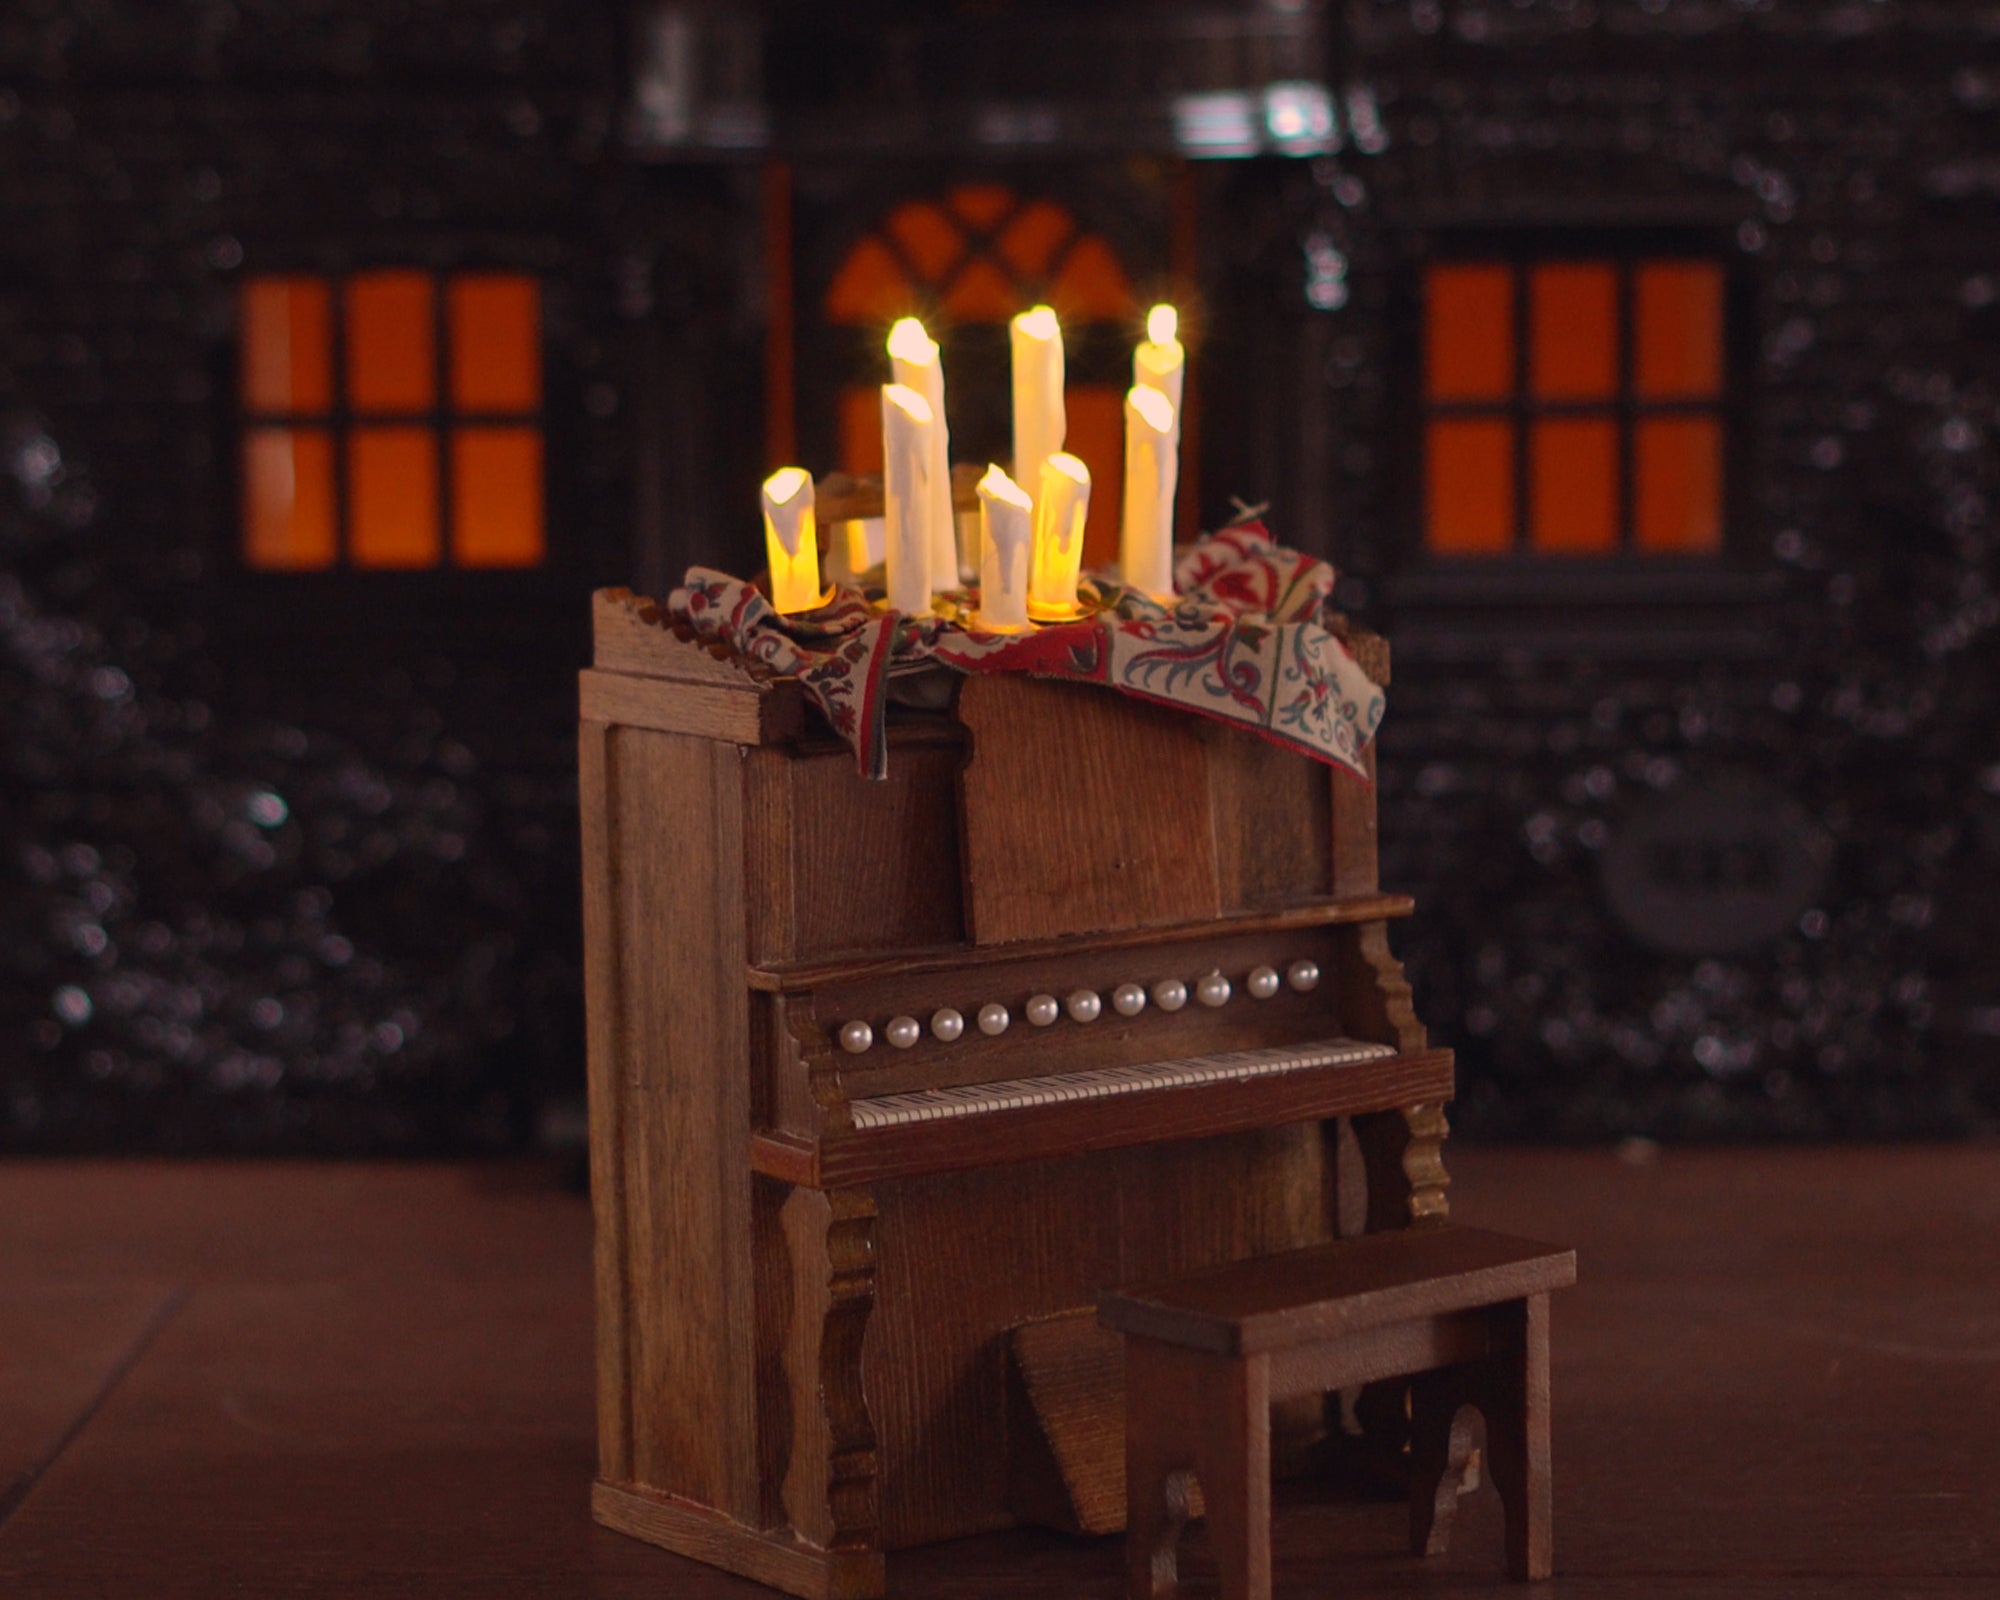 Miniature Dollhouse Candles made from String Lights and Straws